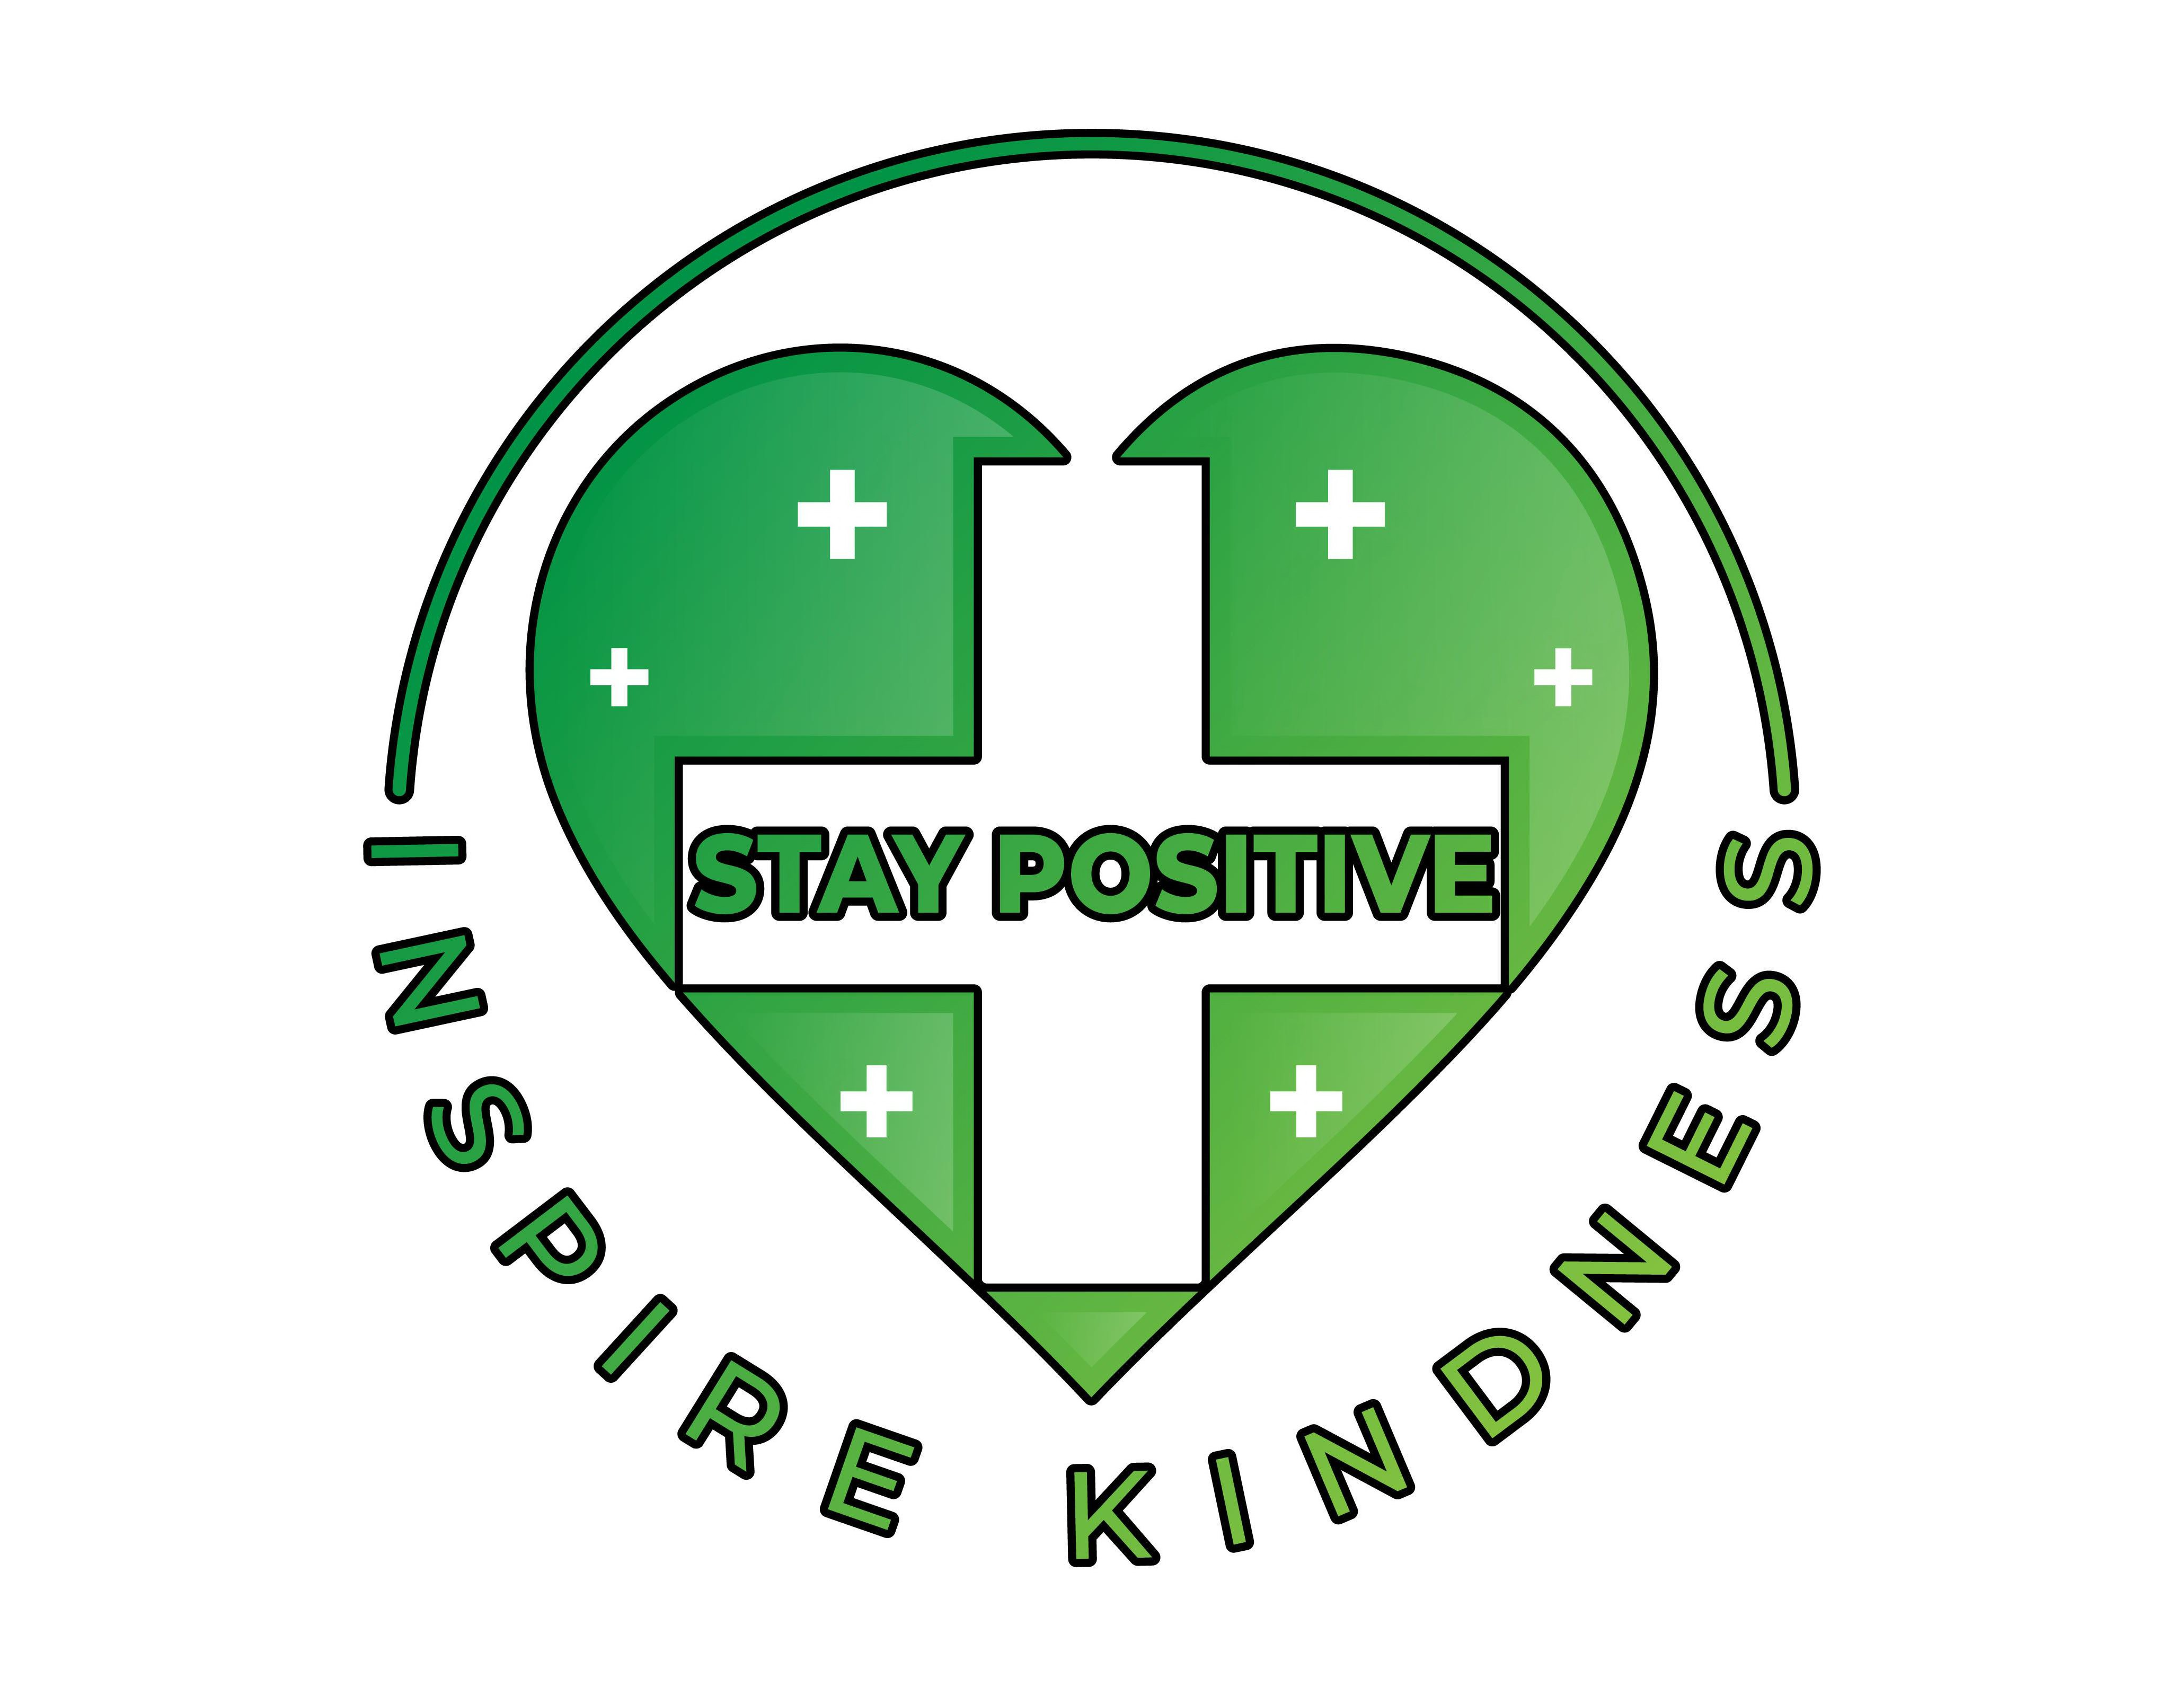  STAY POSITIVE INSPIRE KINDNESS +